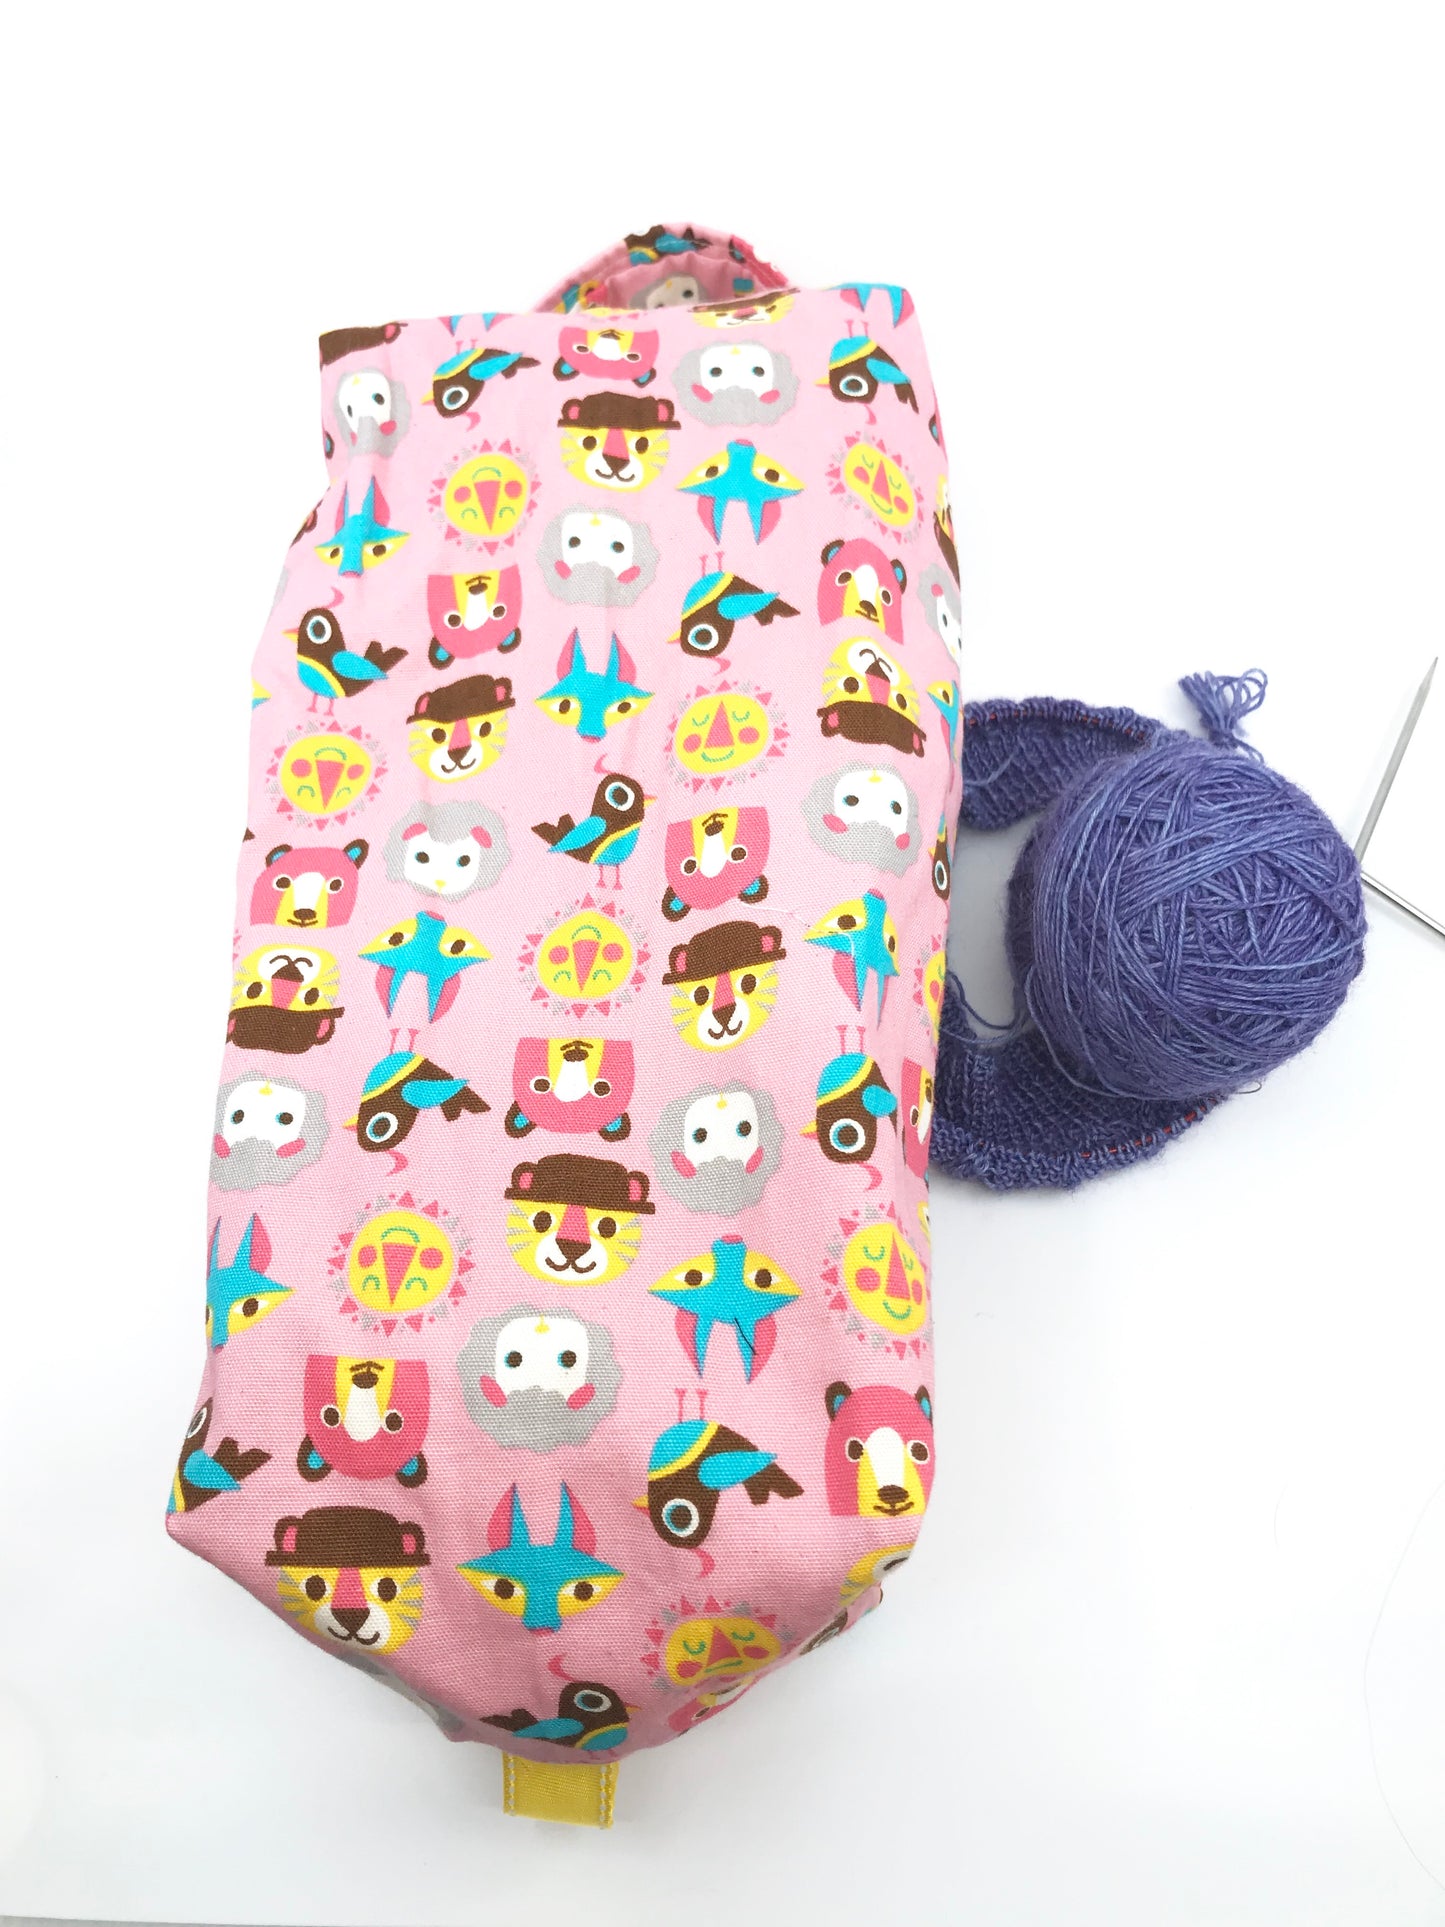 Large Box Bag || All the Animals on Pink || Japanese Fabric Project Bag